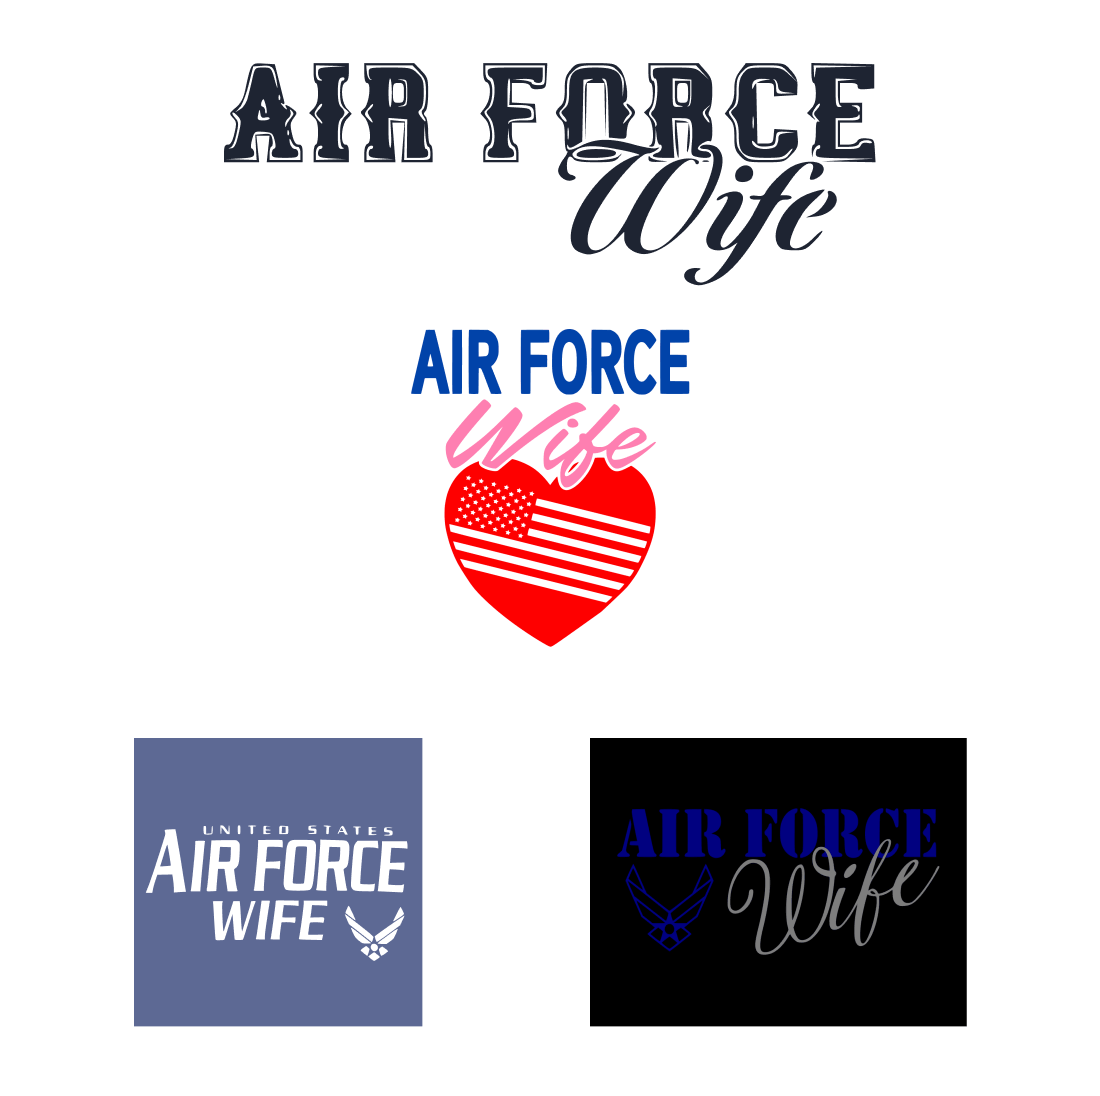 Creative logos with inscriptions about air force wife.